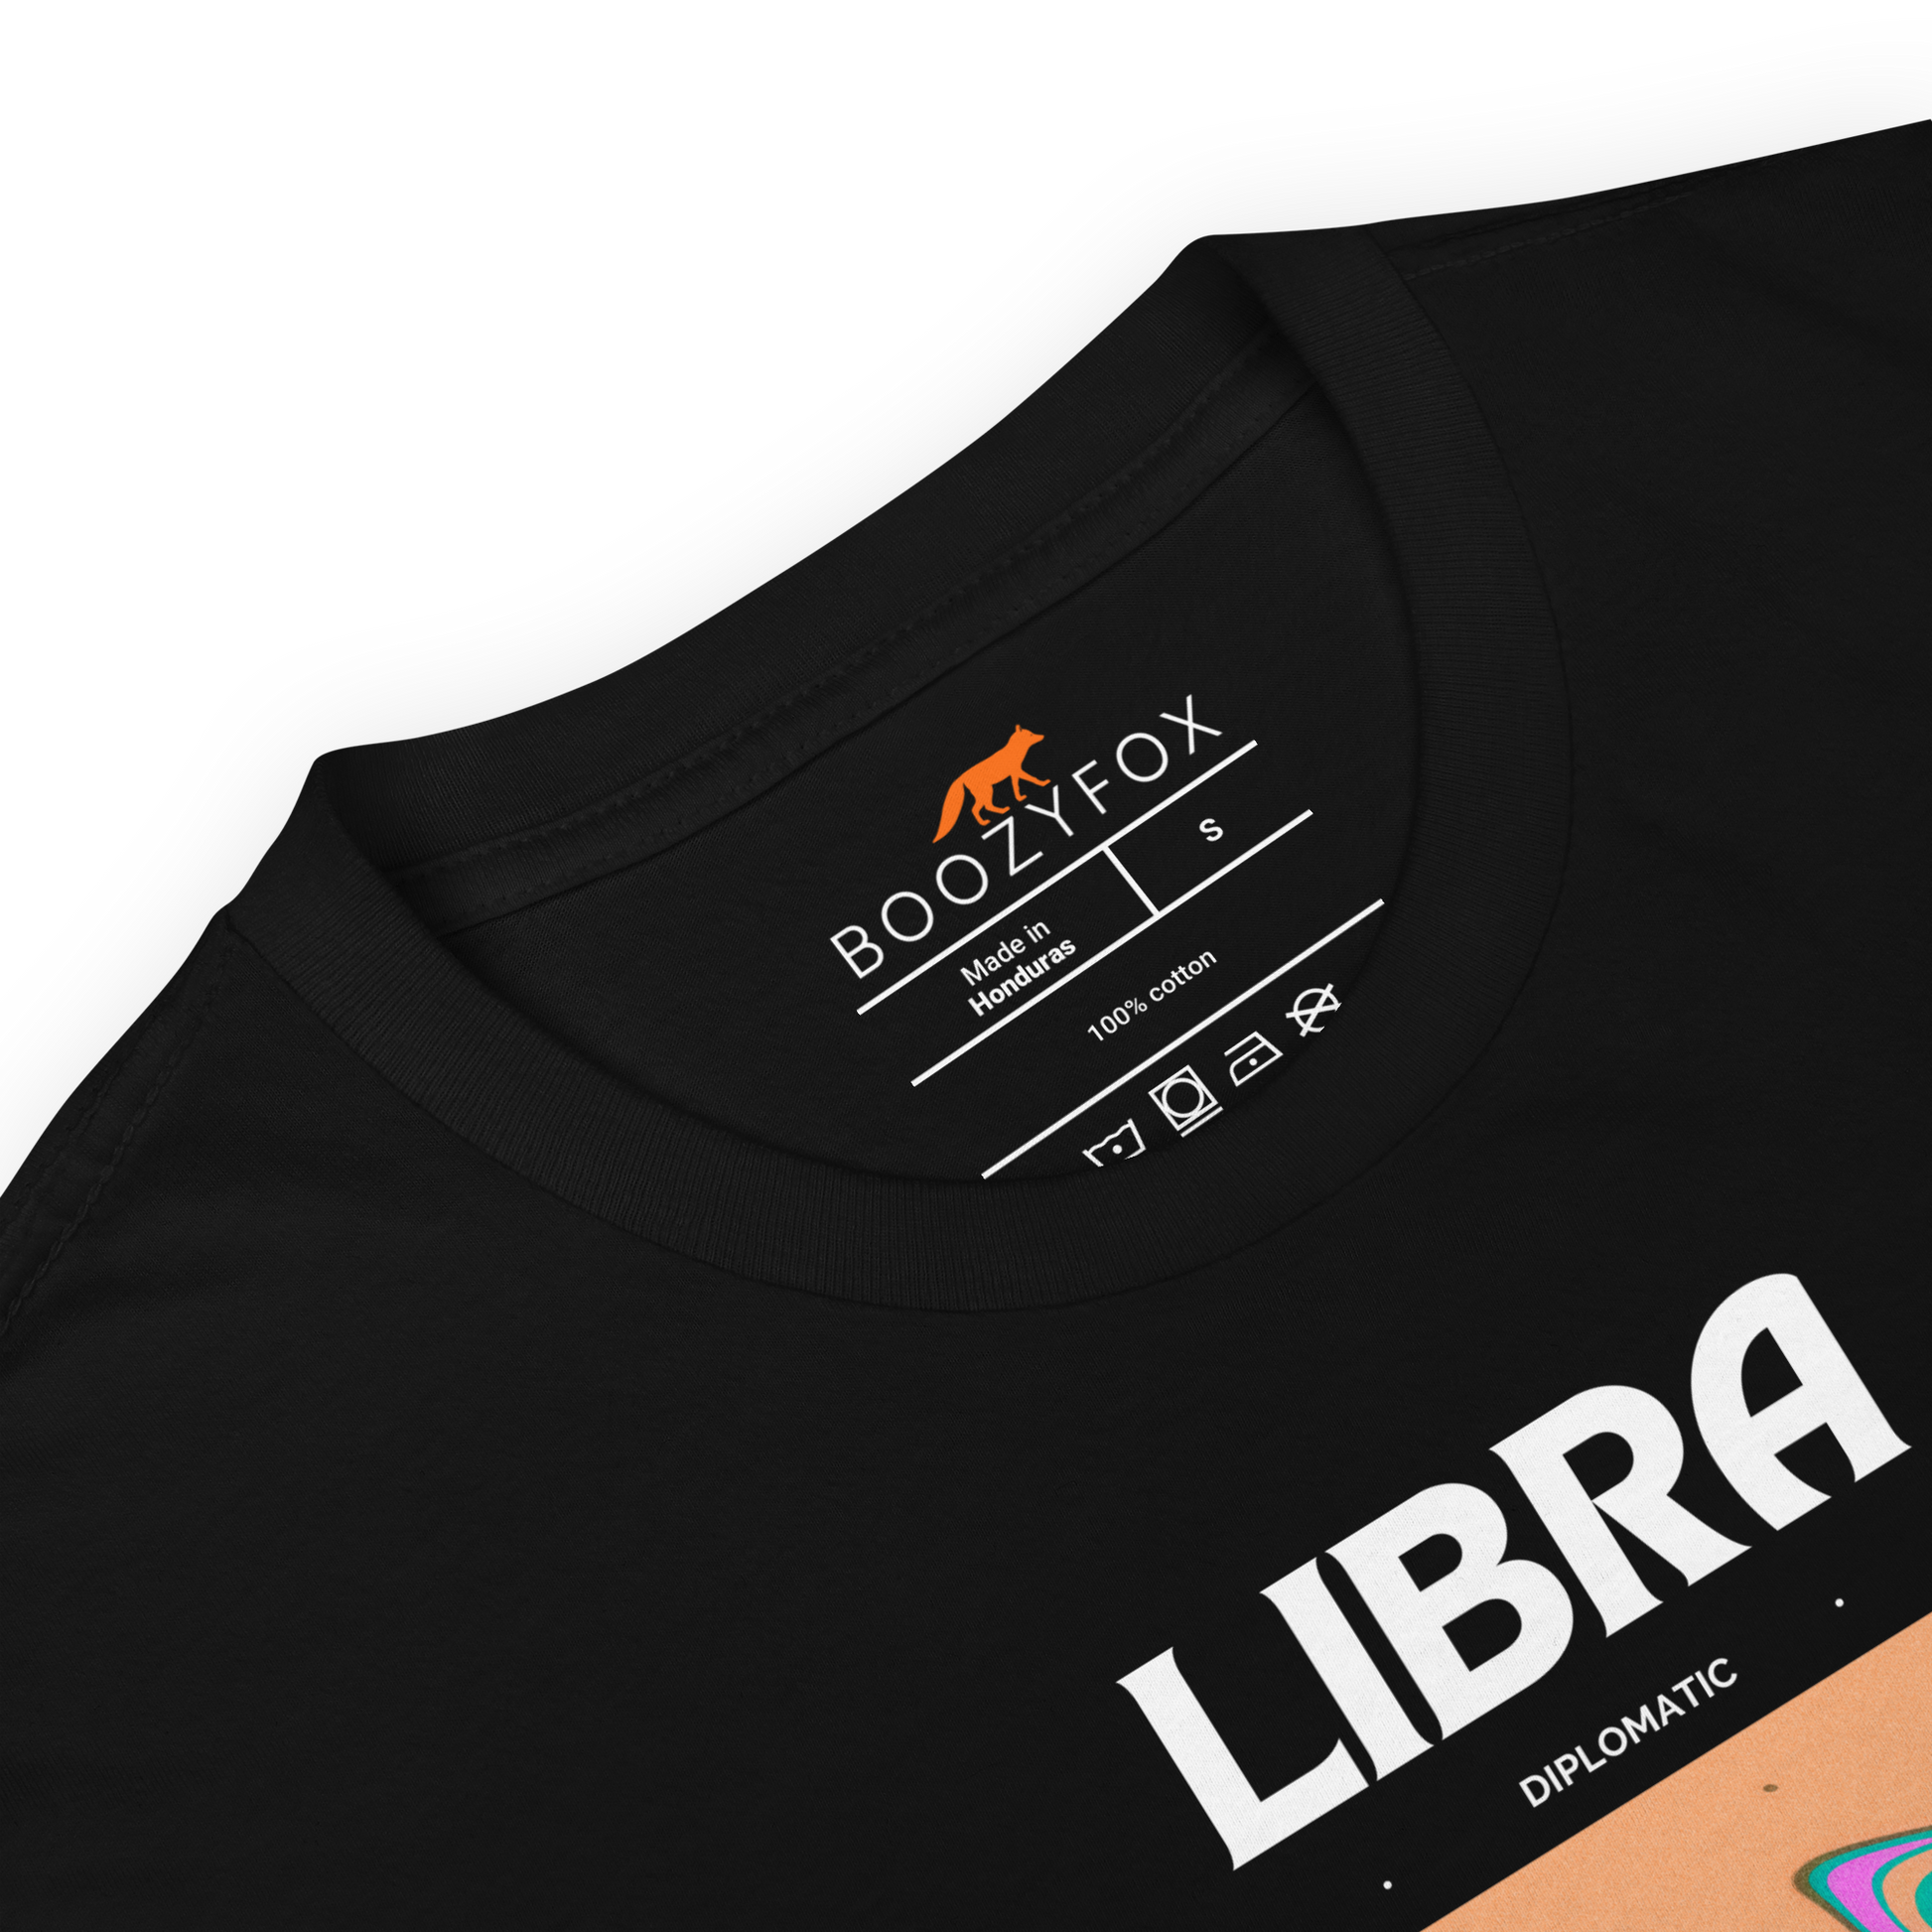 Product details of a Black Libra T-Shirt featuring an Abstract Libra Star Sign graphic on the chest - Cool Graphic Zodiac T-Shirts - Boozy Fox